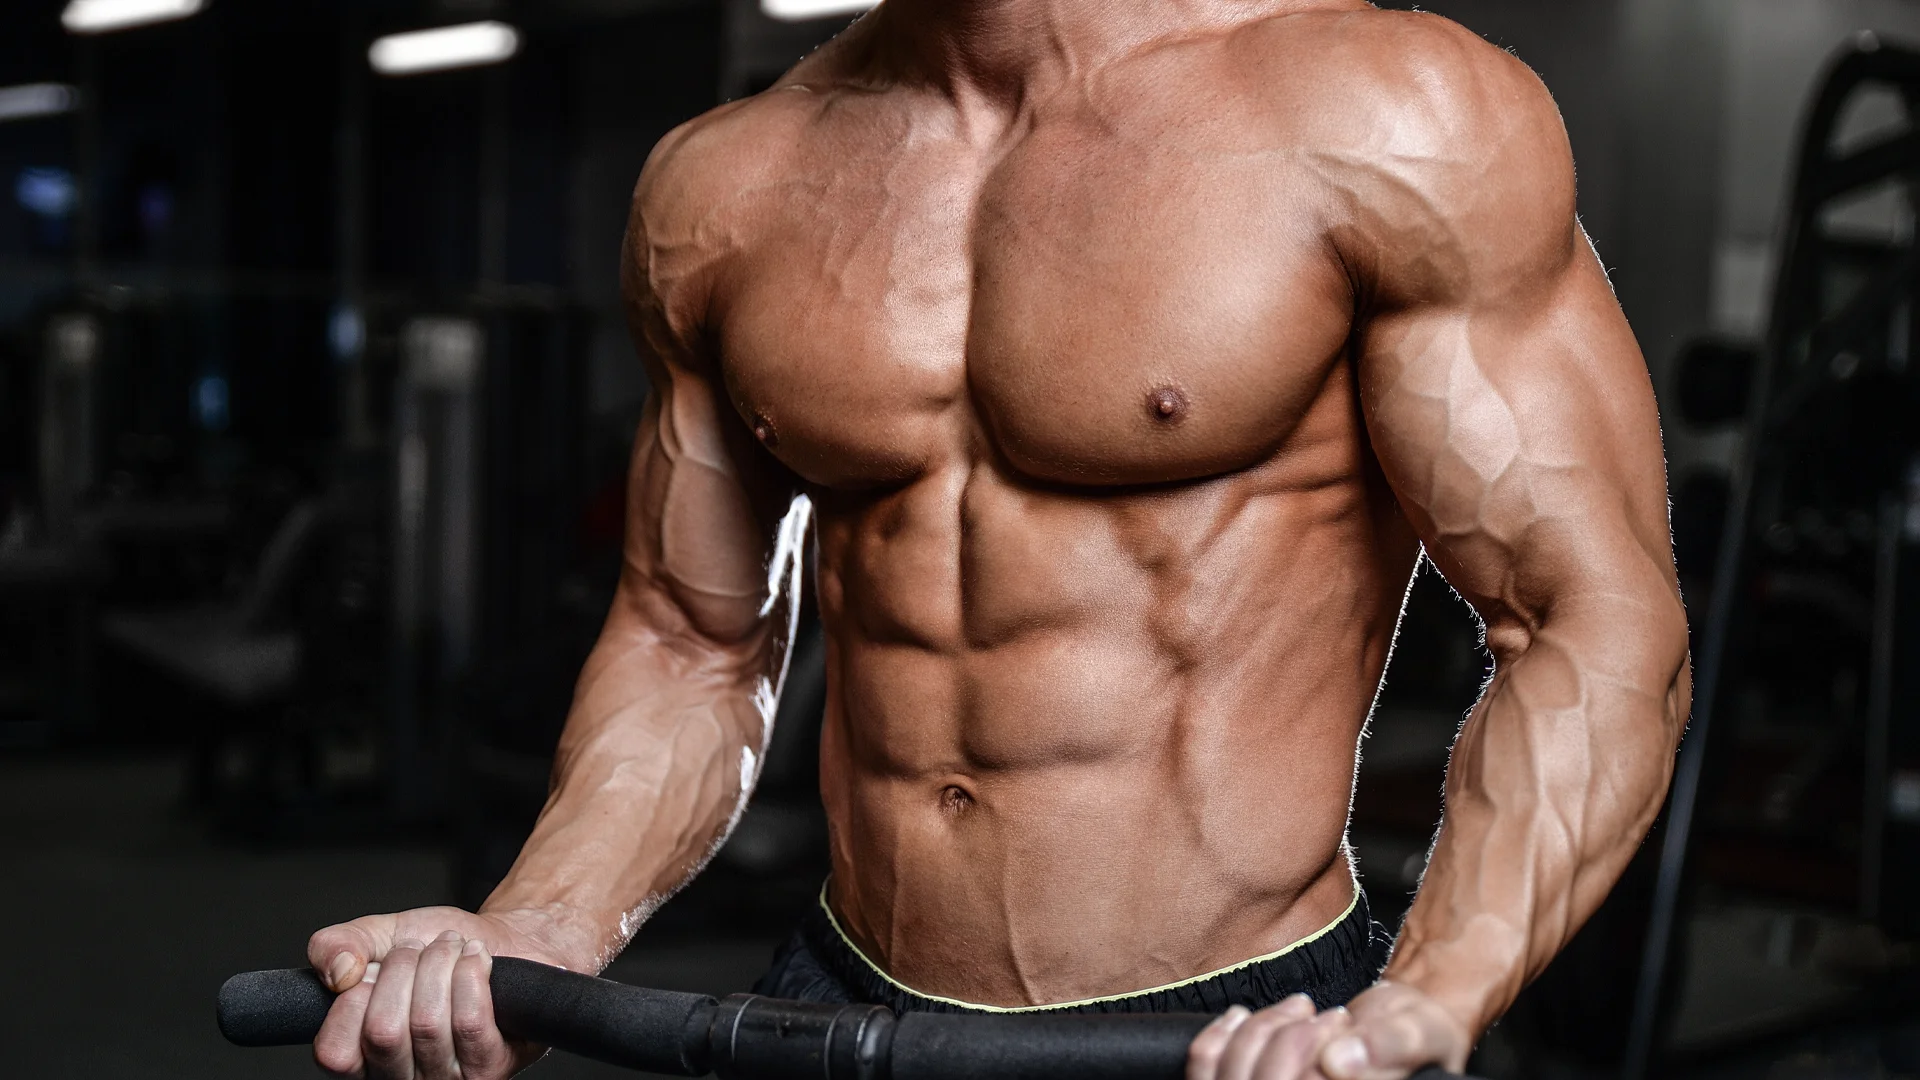 Testosterone enanthate - What is it?